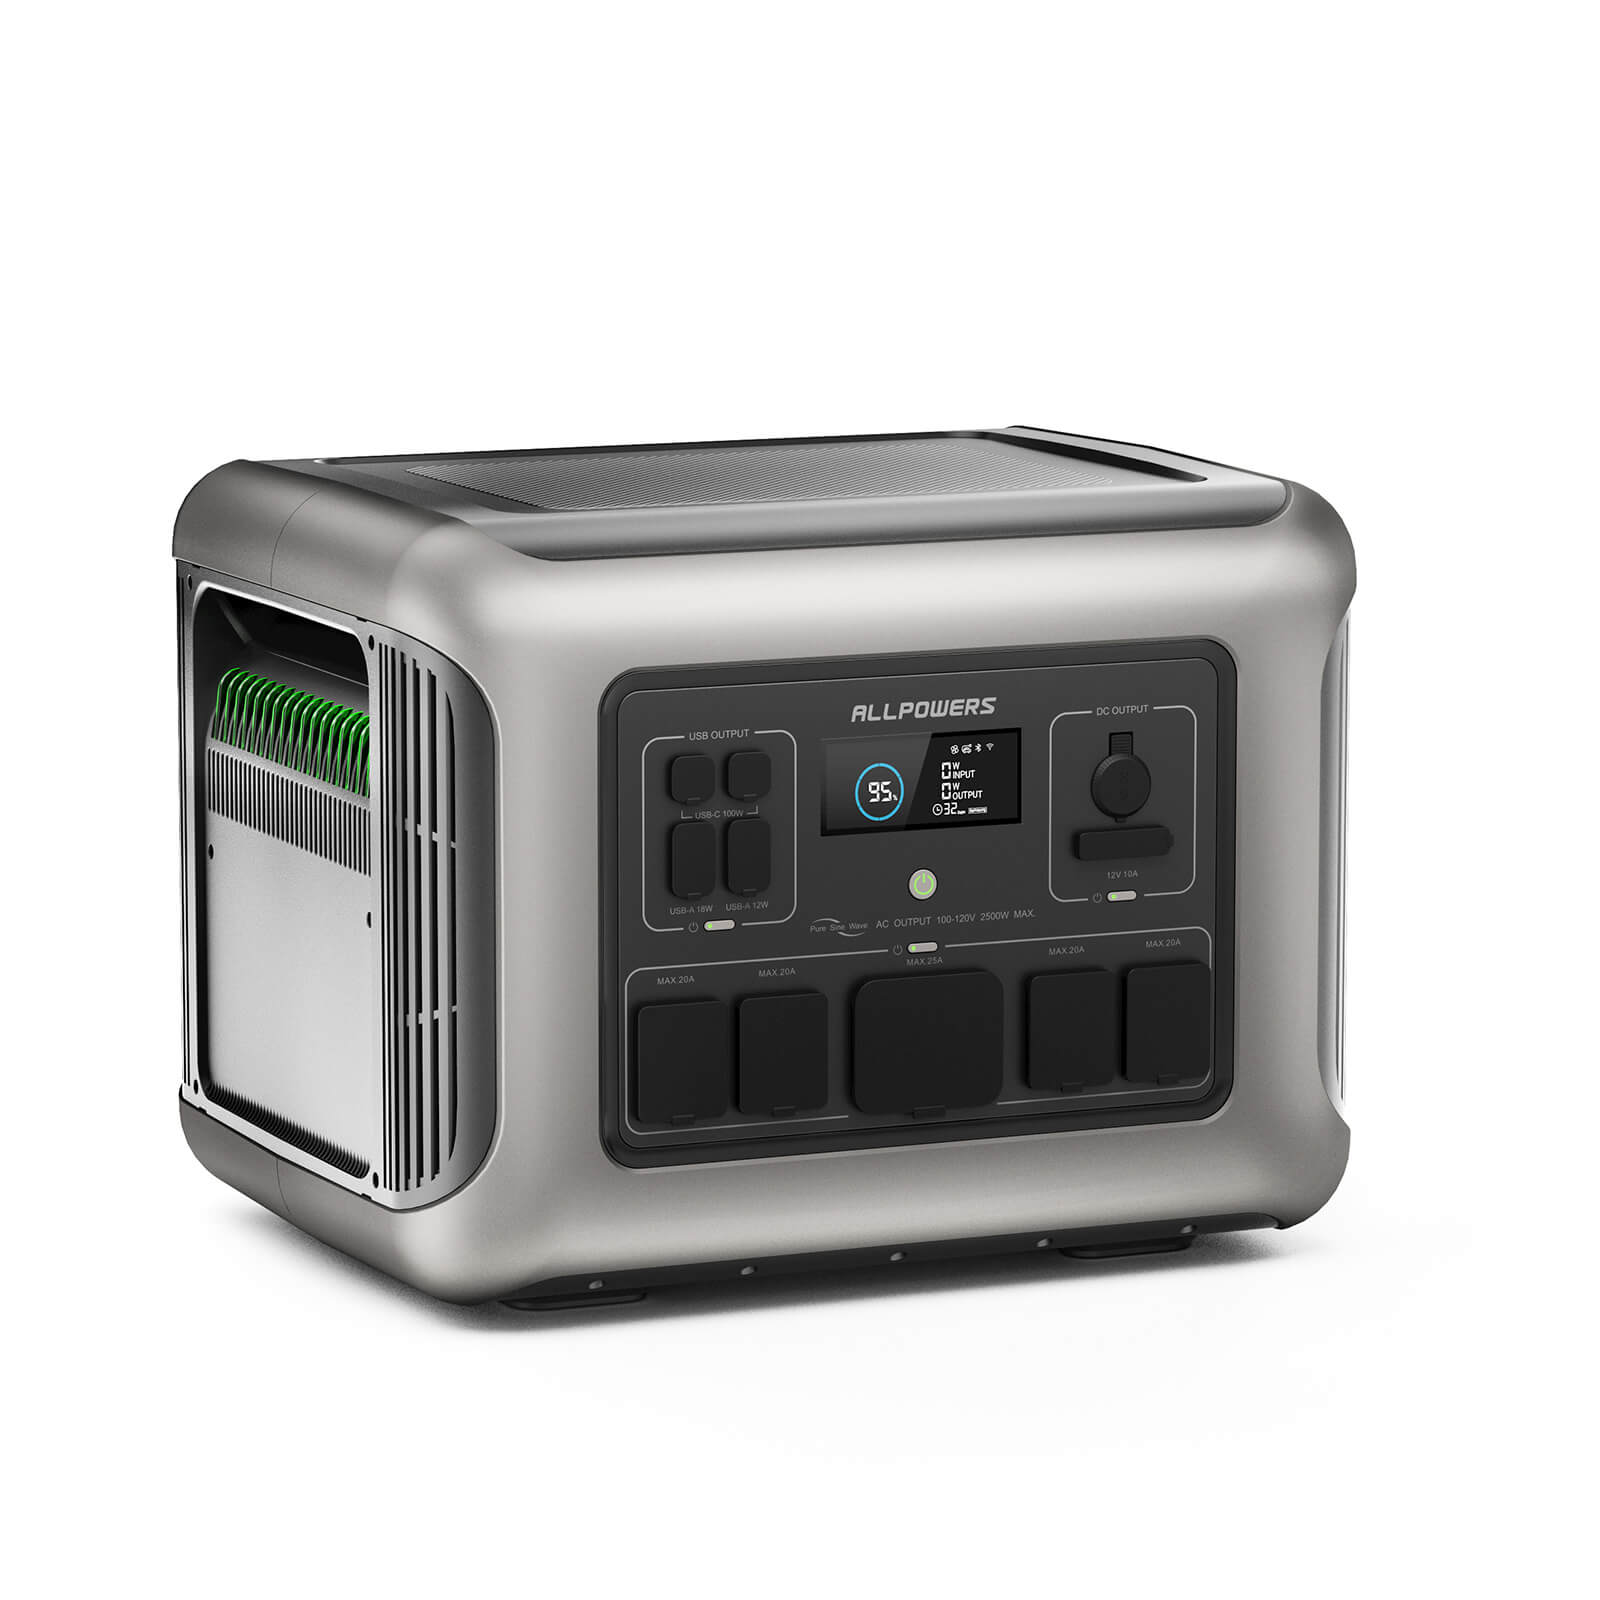 ALLPOWERS R2500 Portable Home Backup Power Station 2500W 2016Wh